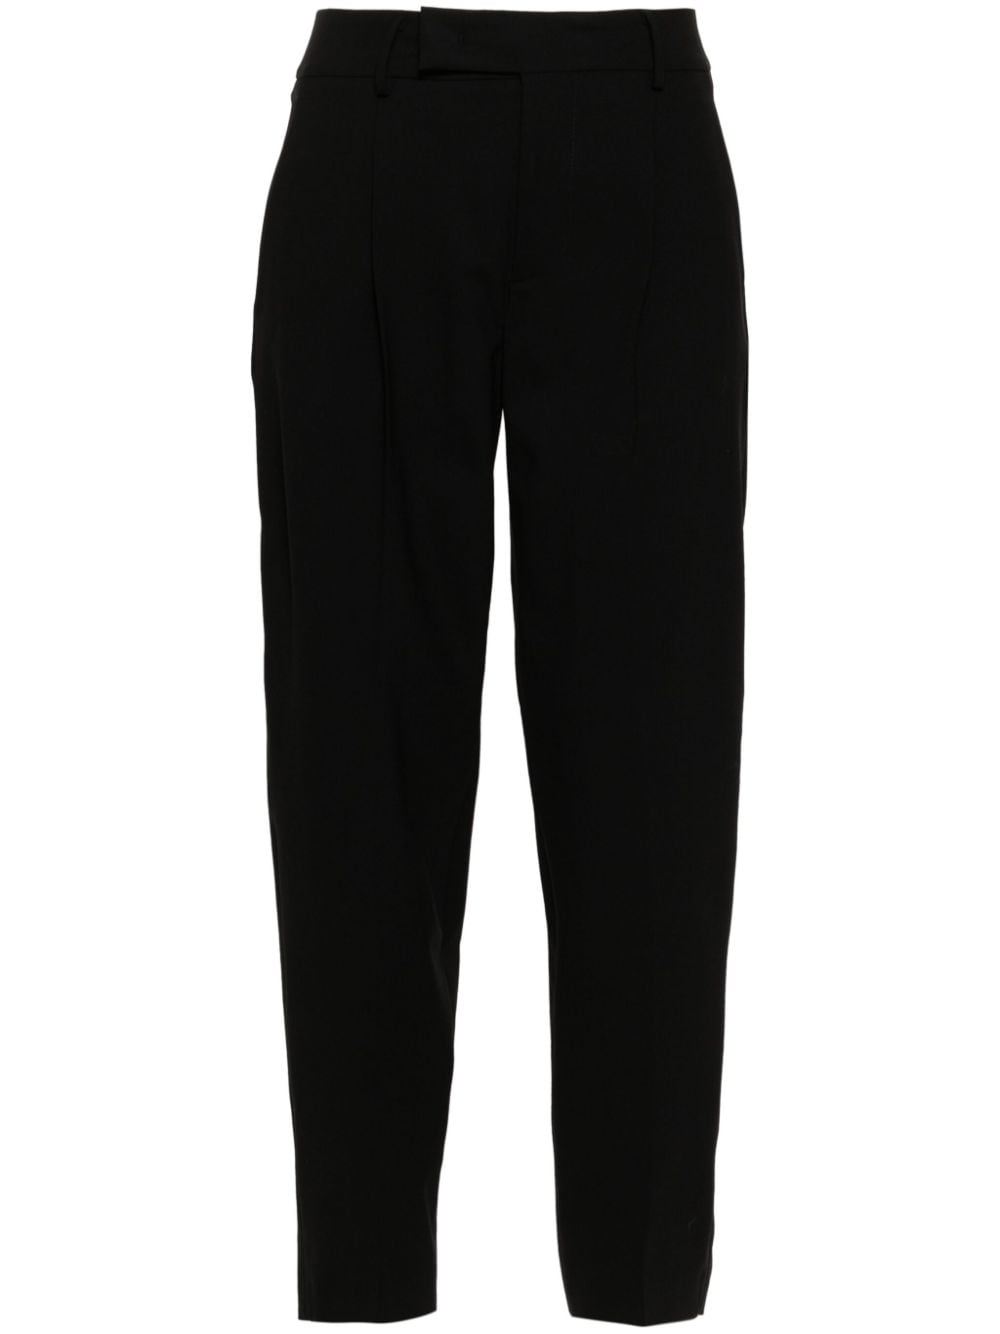 Pt Torino Crepe Tailored Trousers In Black